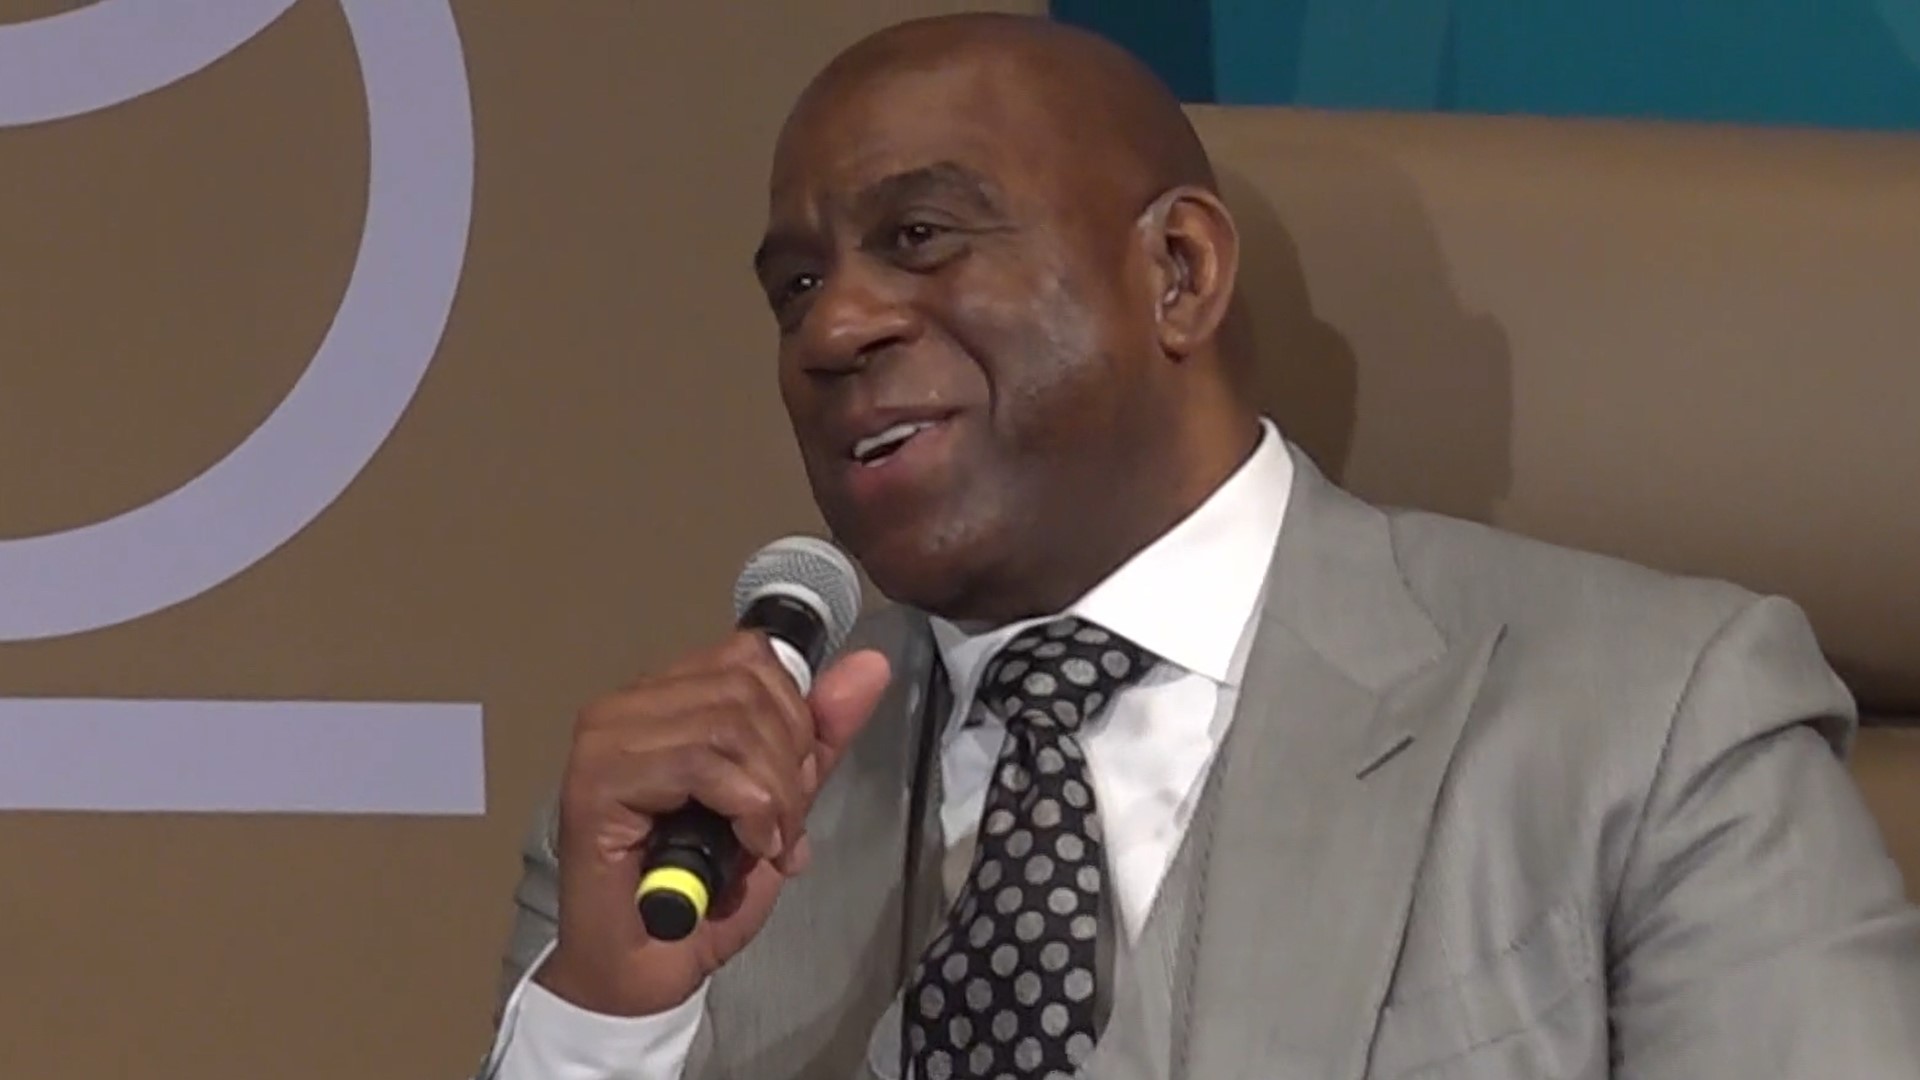 The NBA legend shared the importance of going to the doctor and thanked healthcare workers.